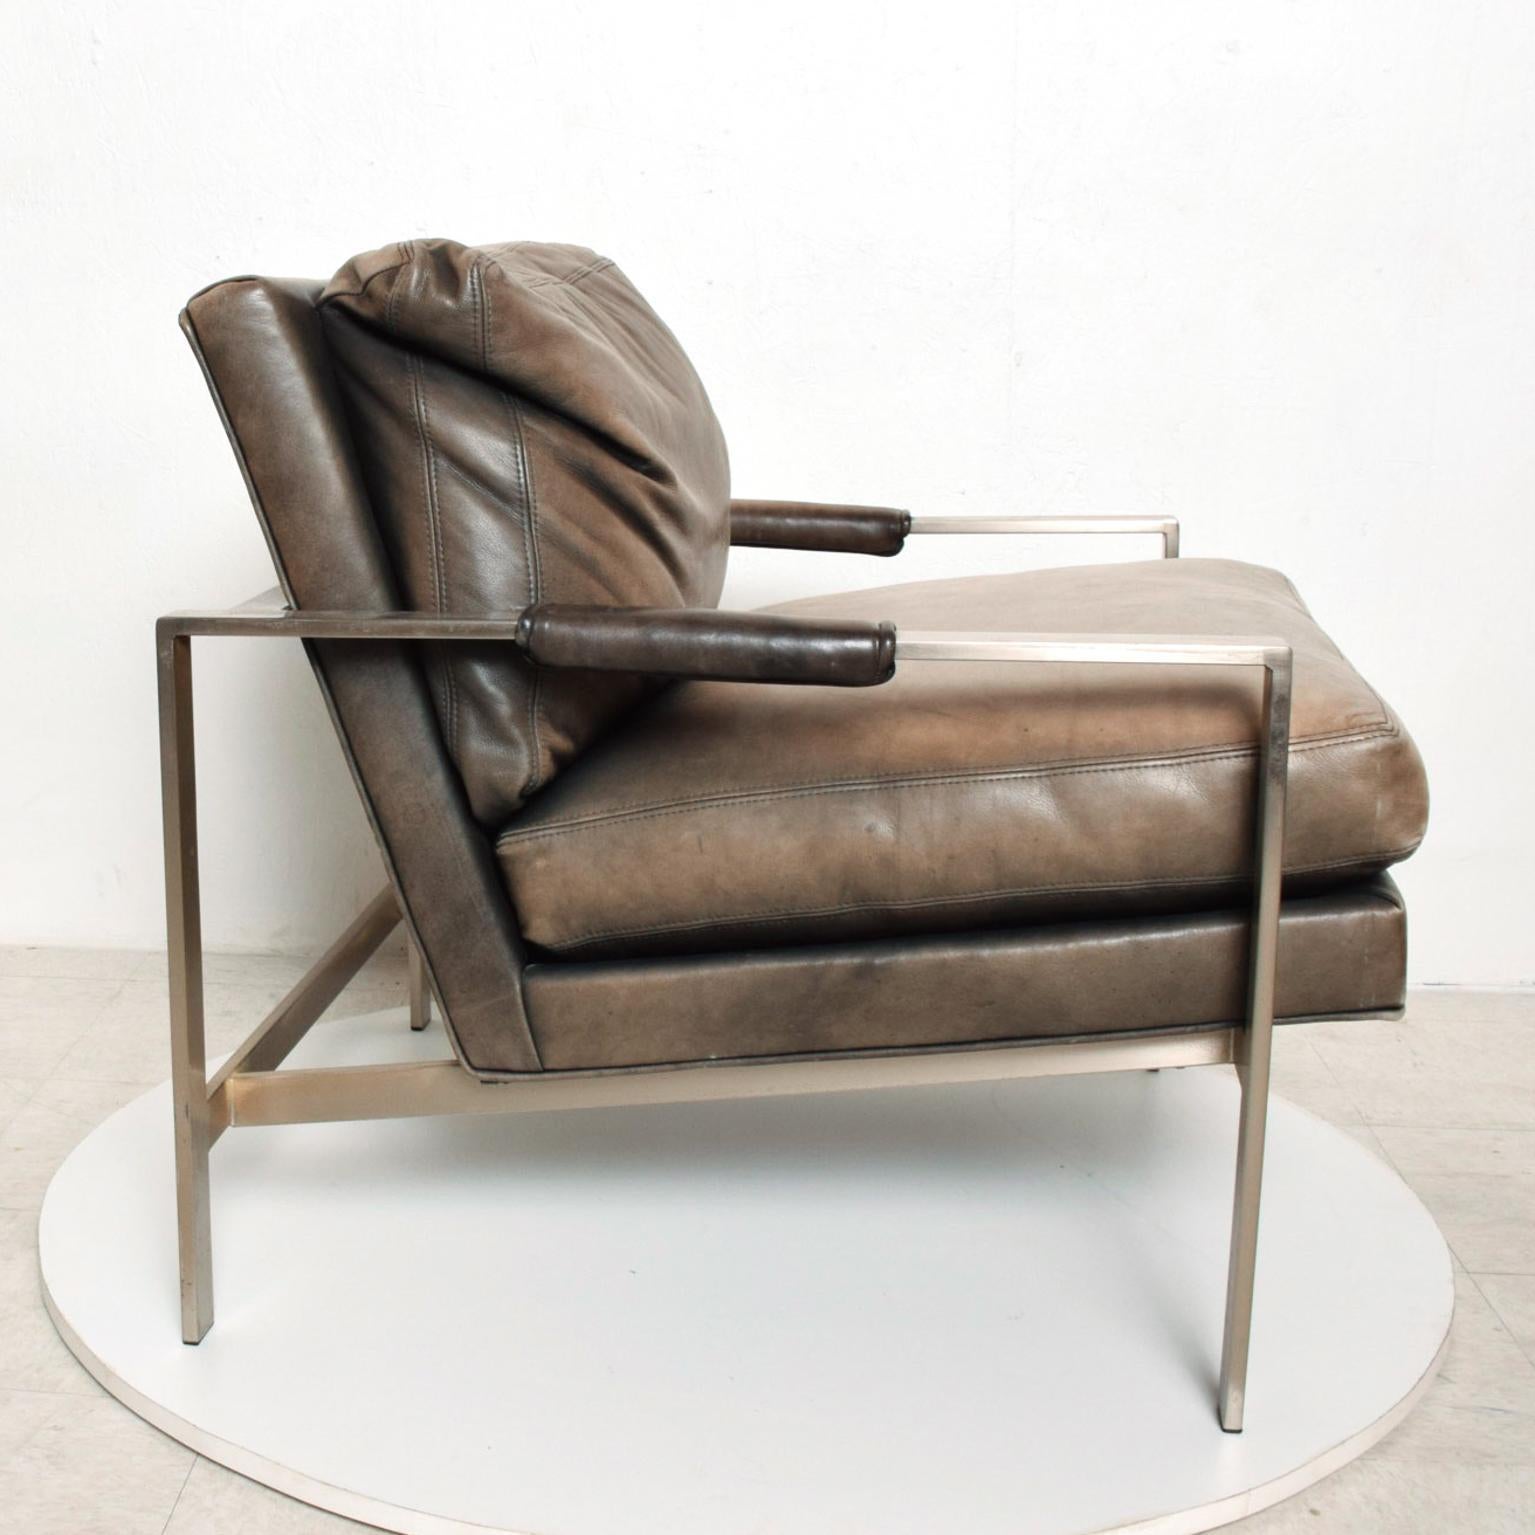 We are pleased to offer for your consideration a mid-century armchair designed by Milo Baughman for Thayer Coggin. Nickel-plated steel with original leather upholstery. The chair retains label from the maker.

Dimensions: 32